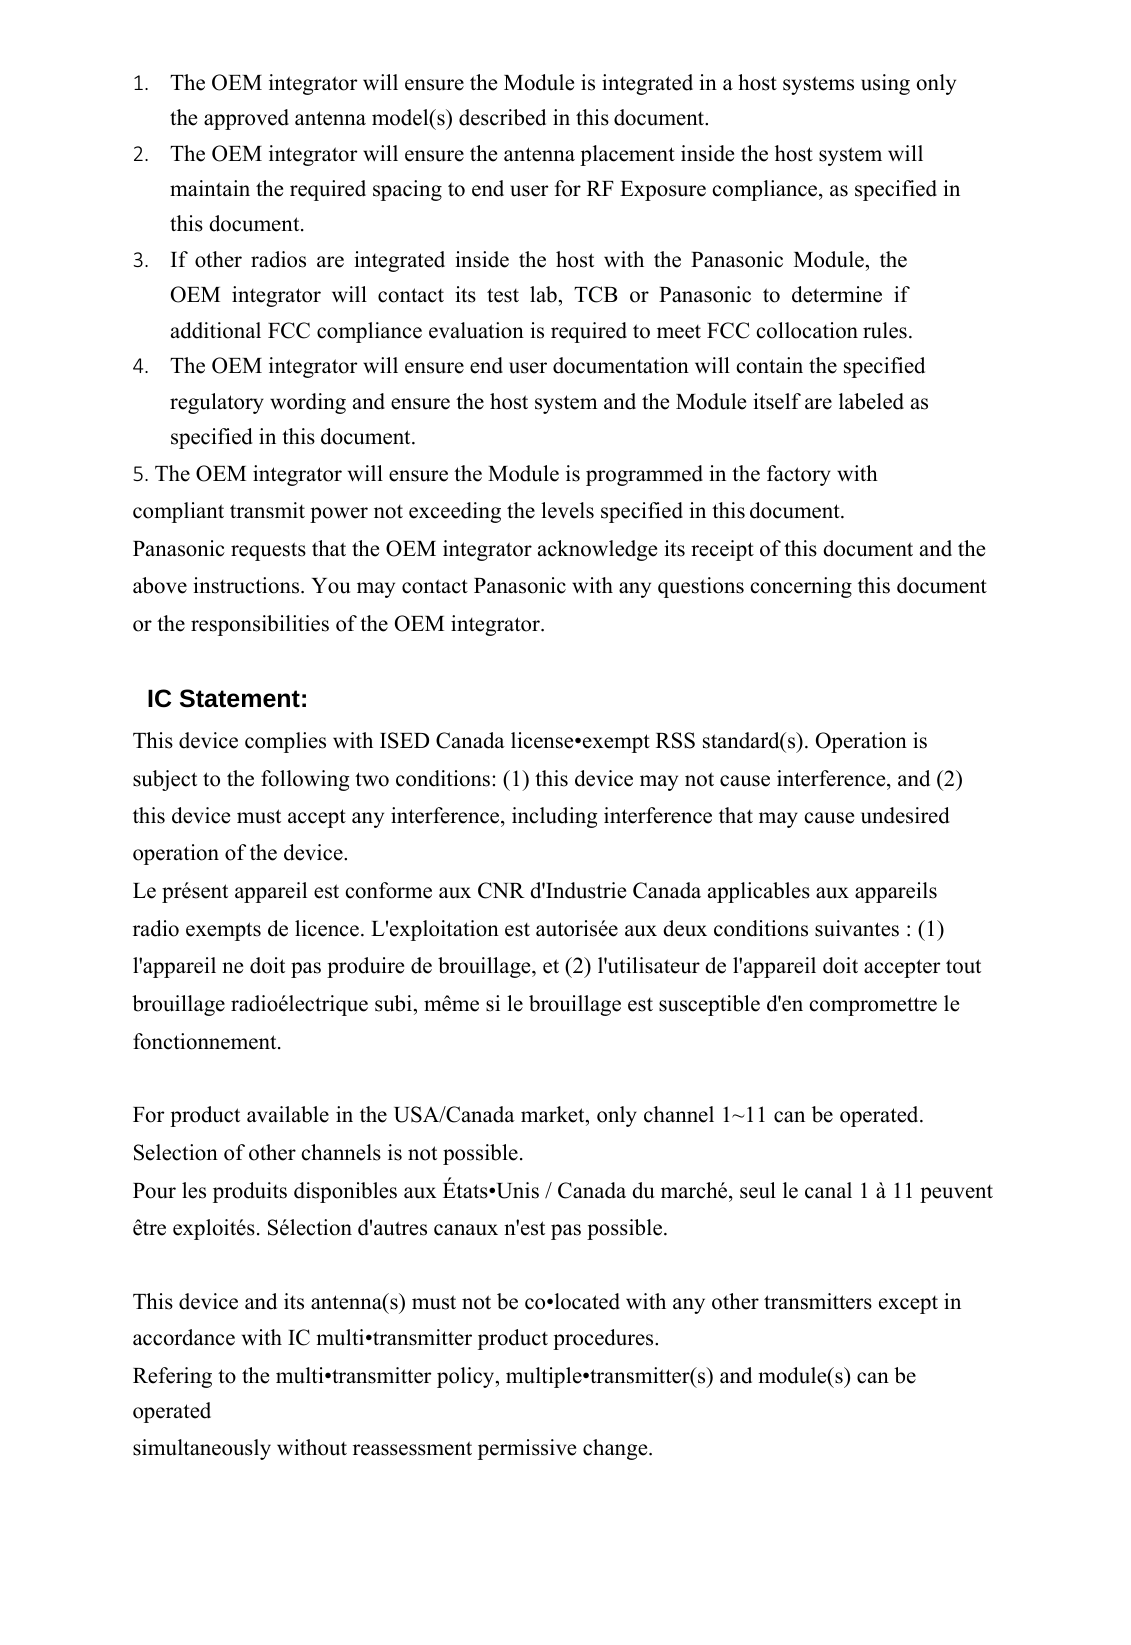    1. The OEM integrator will ensure the Module is integrated in a host systems using only the approved antenna model(s) described in this document. 2. The OEM integrator will ensure the antenna placement inside the host system will maintain the required spacing to end user for RF Exposure compliance, as specified in this document. 3. If other radios are integrated inside the host with the Panasonic Module, the OEM integrator will contact its test lab, TCB or Panasonic to determine if additional FCC compliance evaluation is required to meet FCC collocation rules. 4. The OEM integrator will ensure end user documentation will contain the specified regulatory wording and ensure the host system and the Module itself are labeled as specified in this document. 5. The OEM integrator will ensure the Module is programmed in the factory with compliant transmit power not exceeding the levels specified in this document. Panasonic requests that the OEM integrator acknowledge its receipt of this document and the above instructions. You may contact Panasonic with any questions concerning this document or the responsibilities of the OEM integrator.  IC Statement: This device complies with ISED Canada license•exempt RSS standard(s). Operation is subject to the following two conditions: (1) this device may not cause interference, and (2) this device must accept any interference, including interference that may cause undesired operation of the device. Le présent appareil est conforme aux CNR d&apos;Industrie Canada applicables aux appareils radio exempts de licence. L&apos;exploitation est autorisée aux deux conditions suivantes : (1) l&apos;appareil ne doit pas produire de brouillage, et (2) l&apos;utilisateur de l&apos;appareil doit accepter tout brouillage radioélectrique subi, même si le brouillage est susceptible d&apos;en compromettre le fonctionnement.  For product available in the USA/Canada market, only channel 1~11 can be operated. Selection of other channels is not possible. Pour les produits disponibles aux États•Unis / Canada du marché, seul le canal 1 à 11 peuvent être exploités. Sélection d&apos;autres canaux n&apos;est pas possible.  This device and its antenna(s) must not be co•located with any other transmitters except in accordance with IC multi•transmitter product procedures. Refering to the multi•transmitter policy, multiple•transmitter(s) and module(s) can be operated simultaneously without reassessment permissive change.  